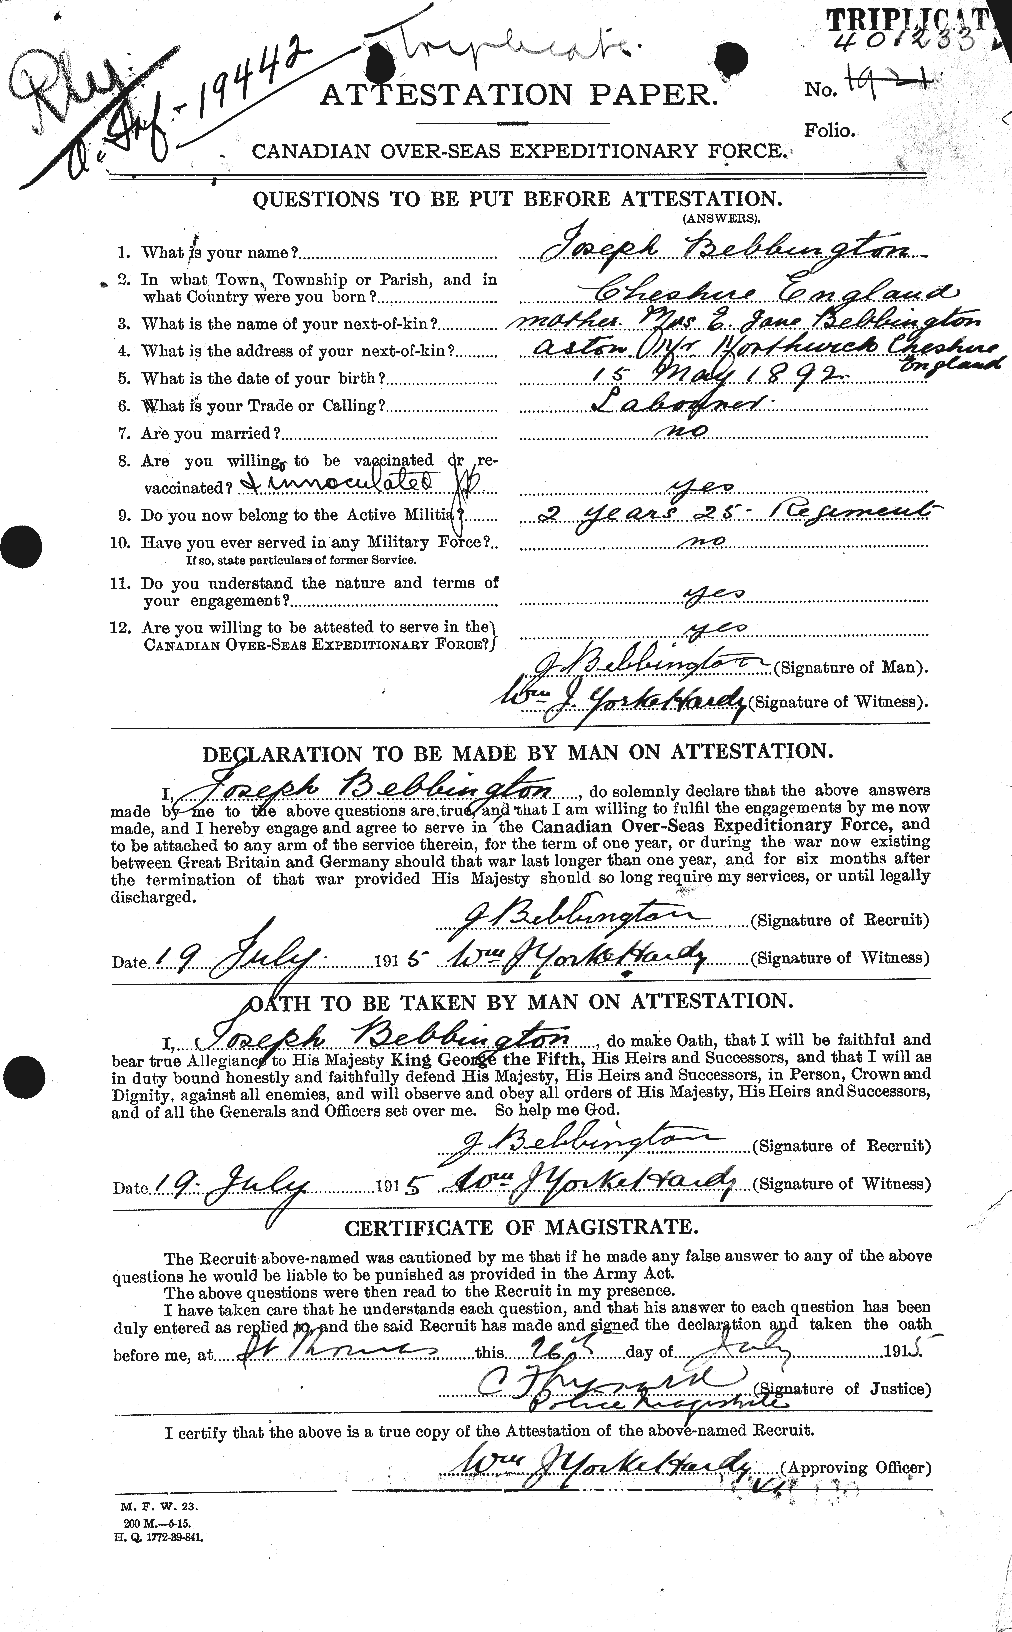 Personnel Records of the First World War - CEF 232001a